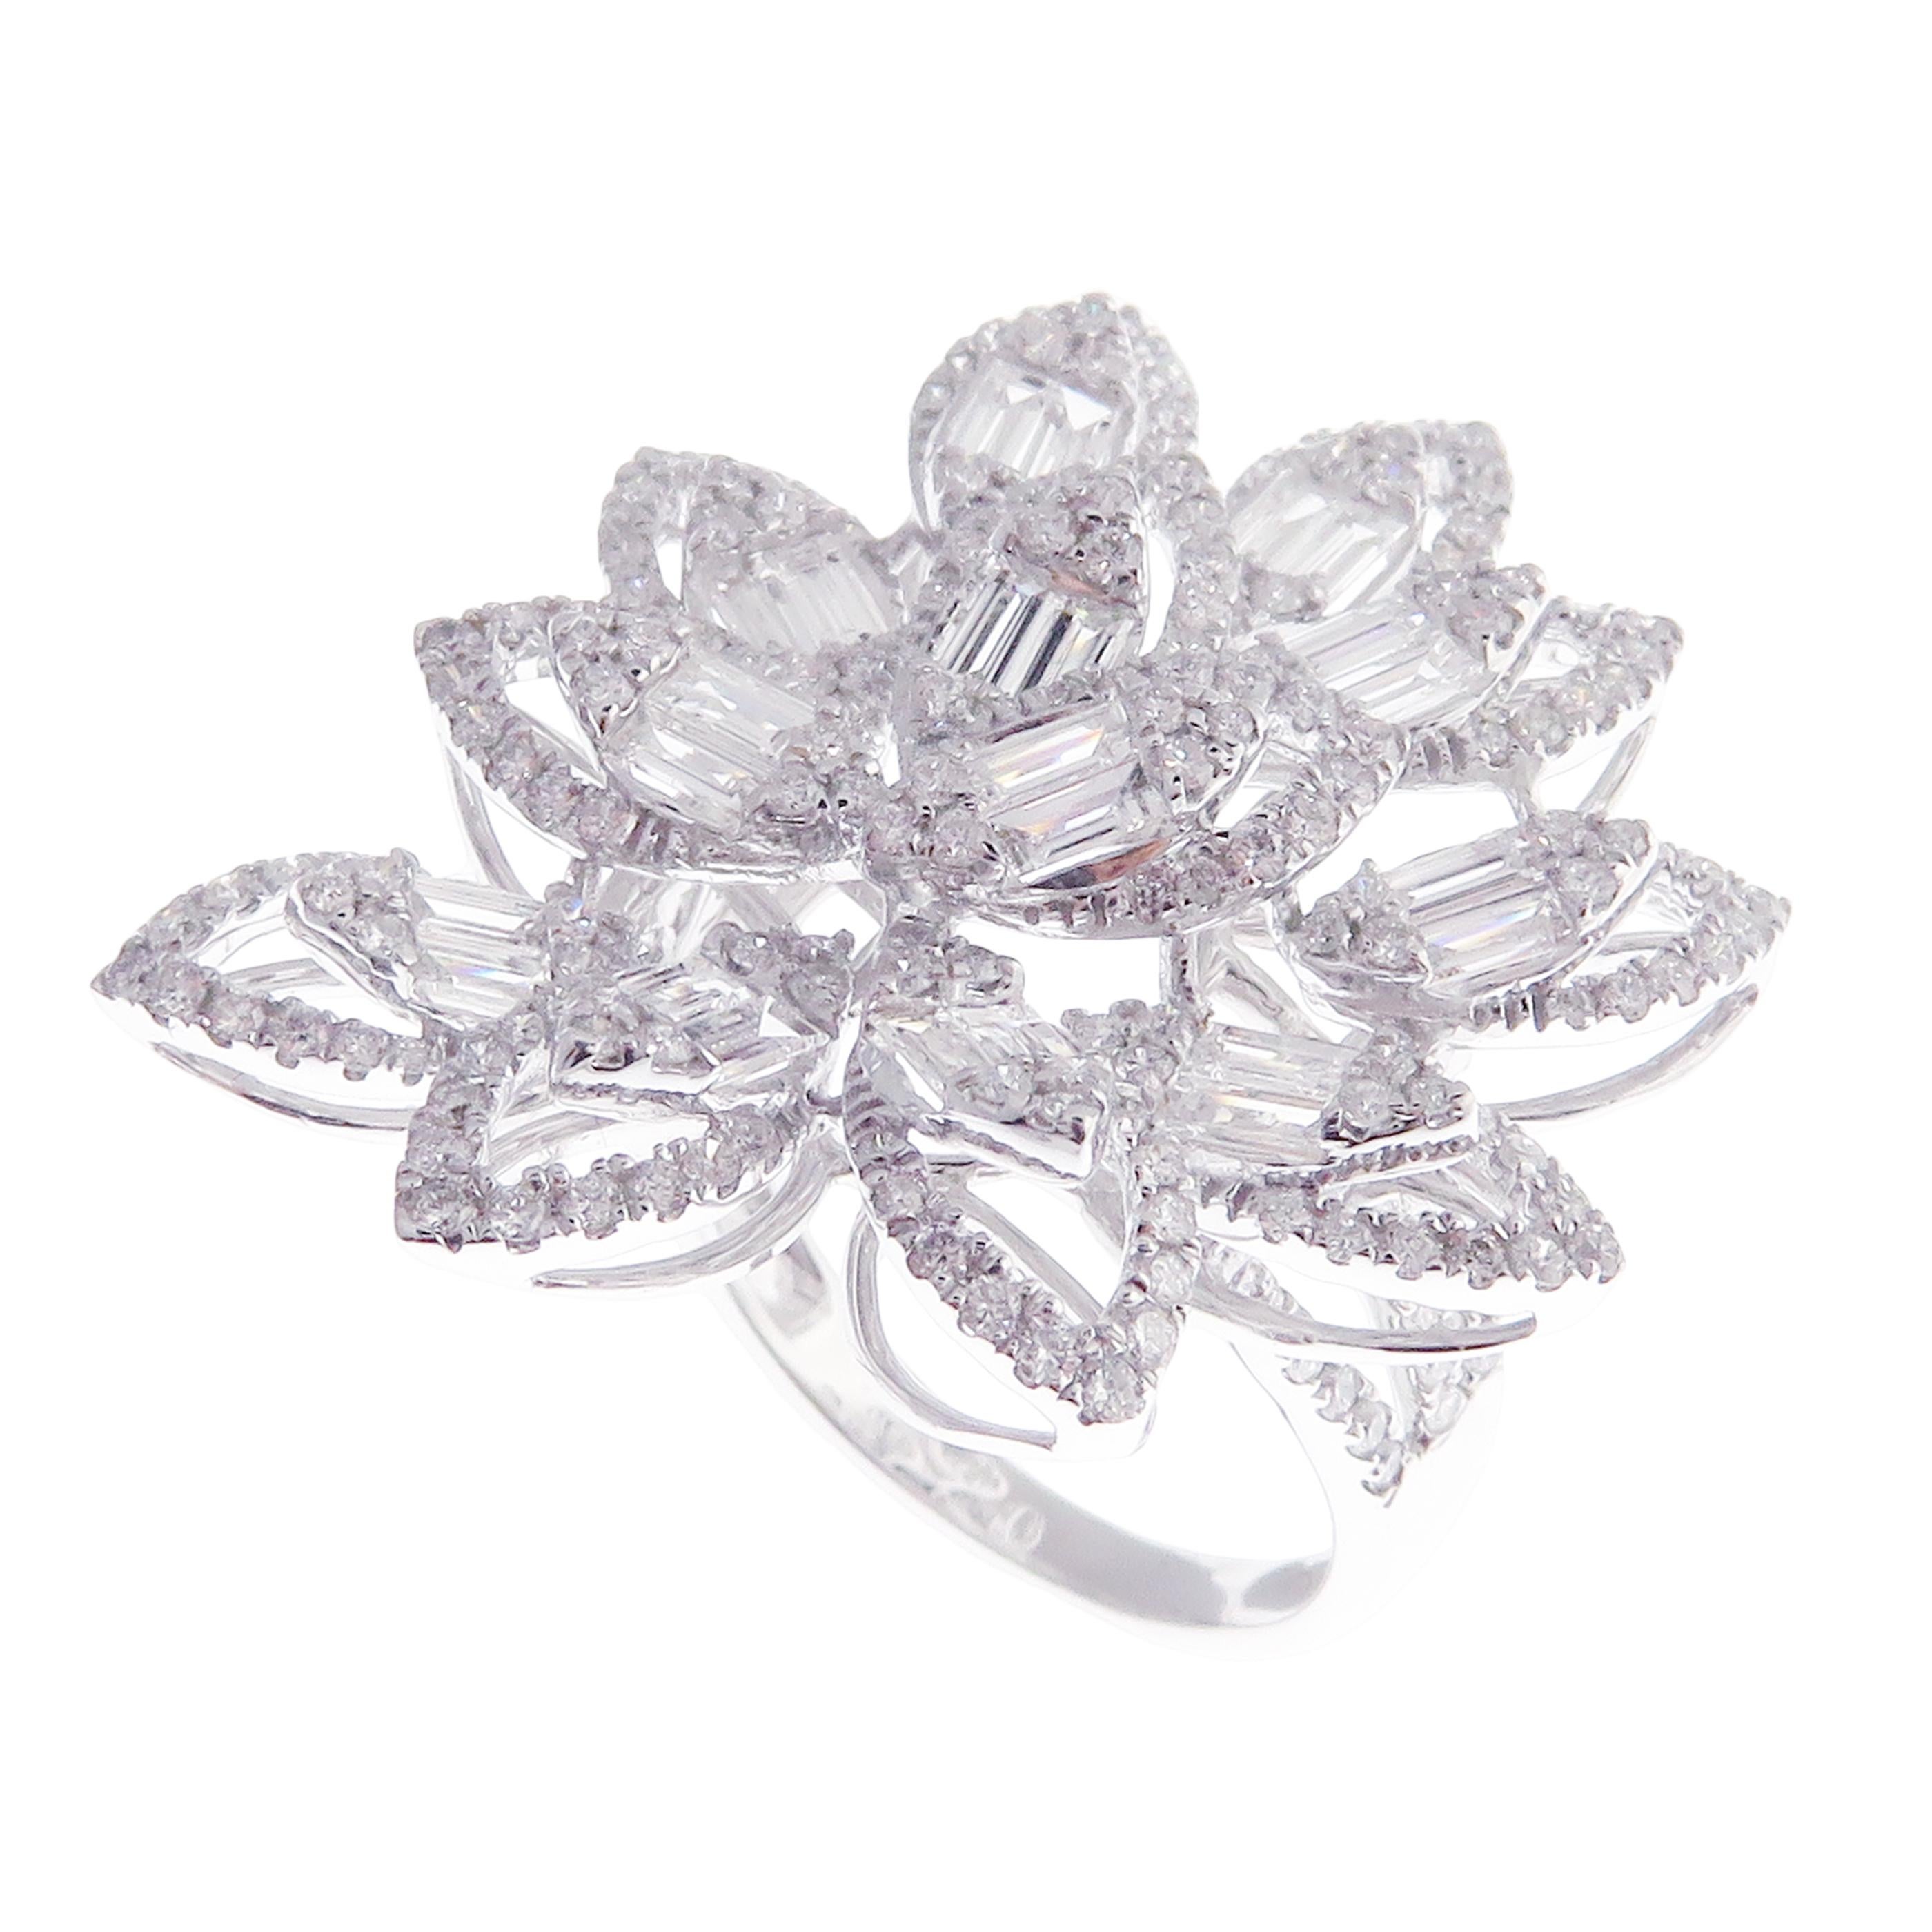 This flower baguette, diamond ring is crafted in 18-karat white gold, weighing approximately 2.67 total carats of SI-V Quality white diamonds. This ring is comfortable and can be sized 